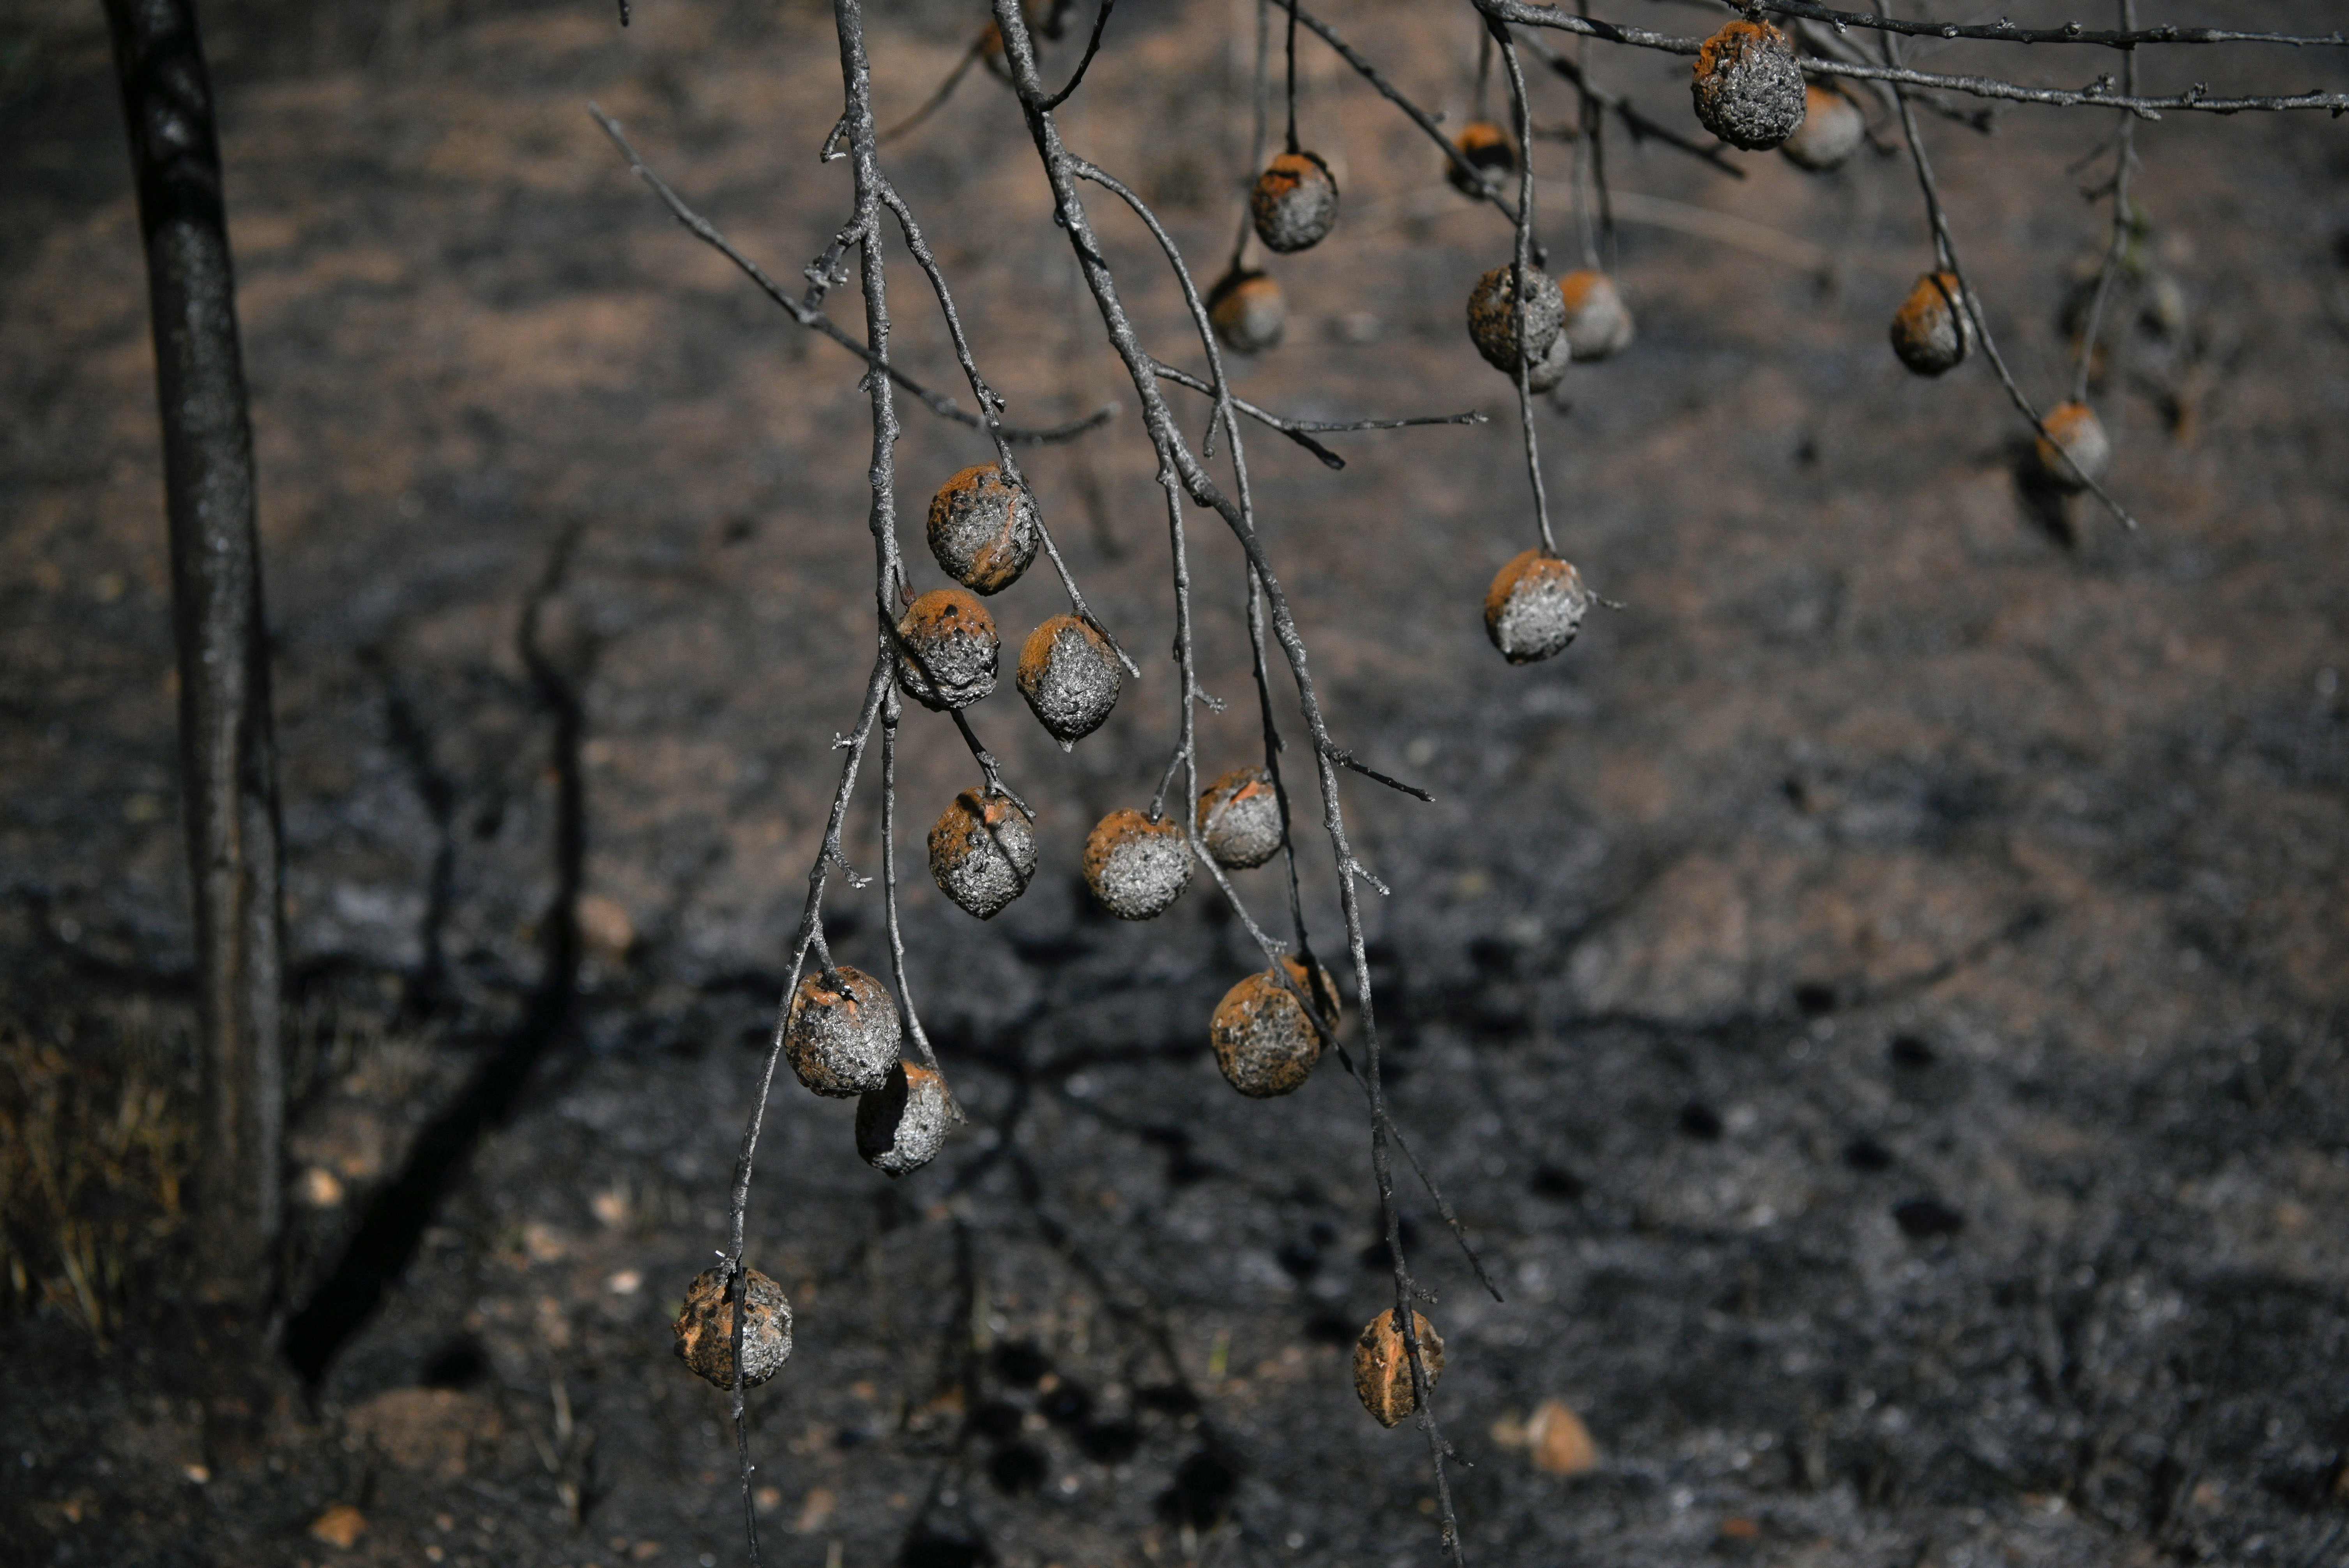 Charred fruit hang on tree branches at a small farm